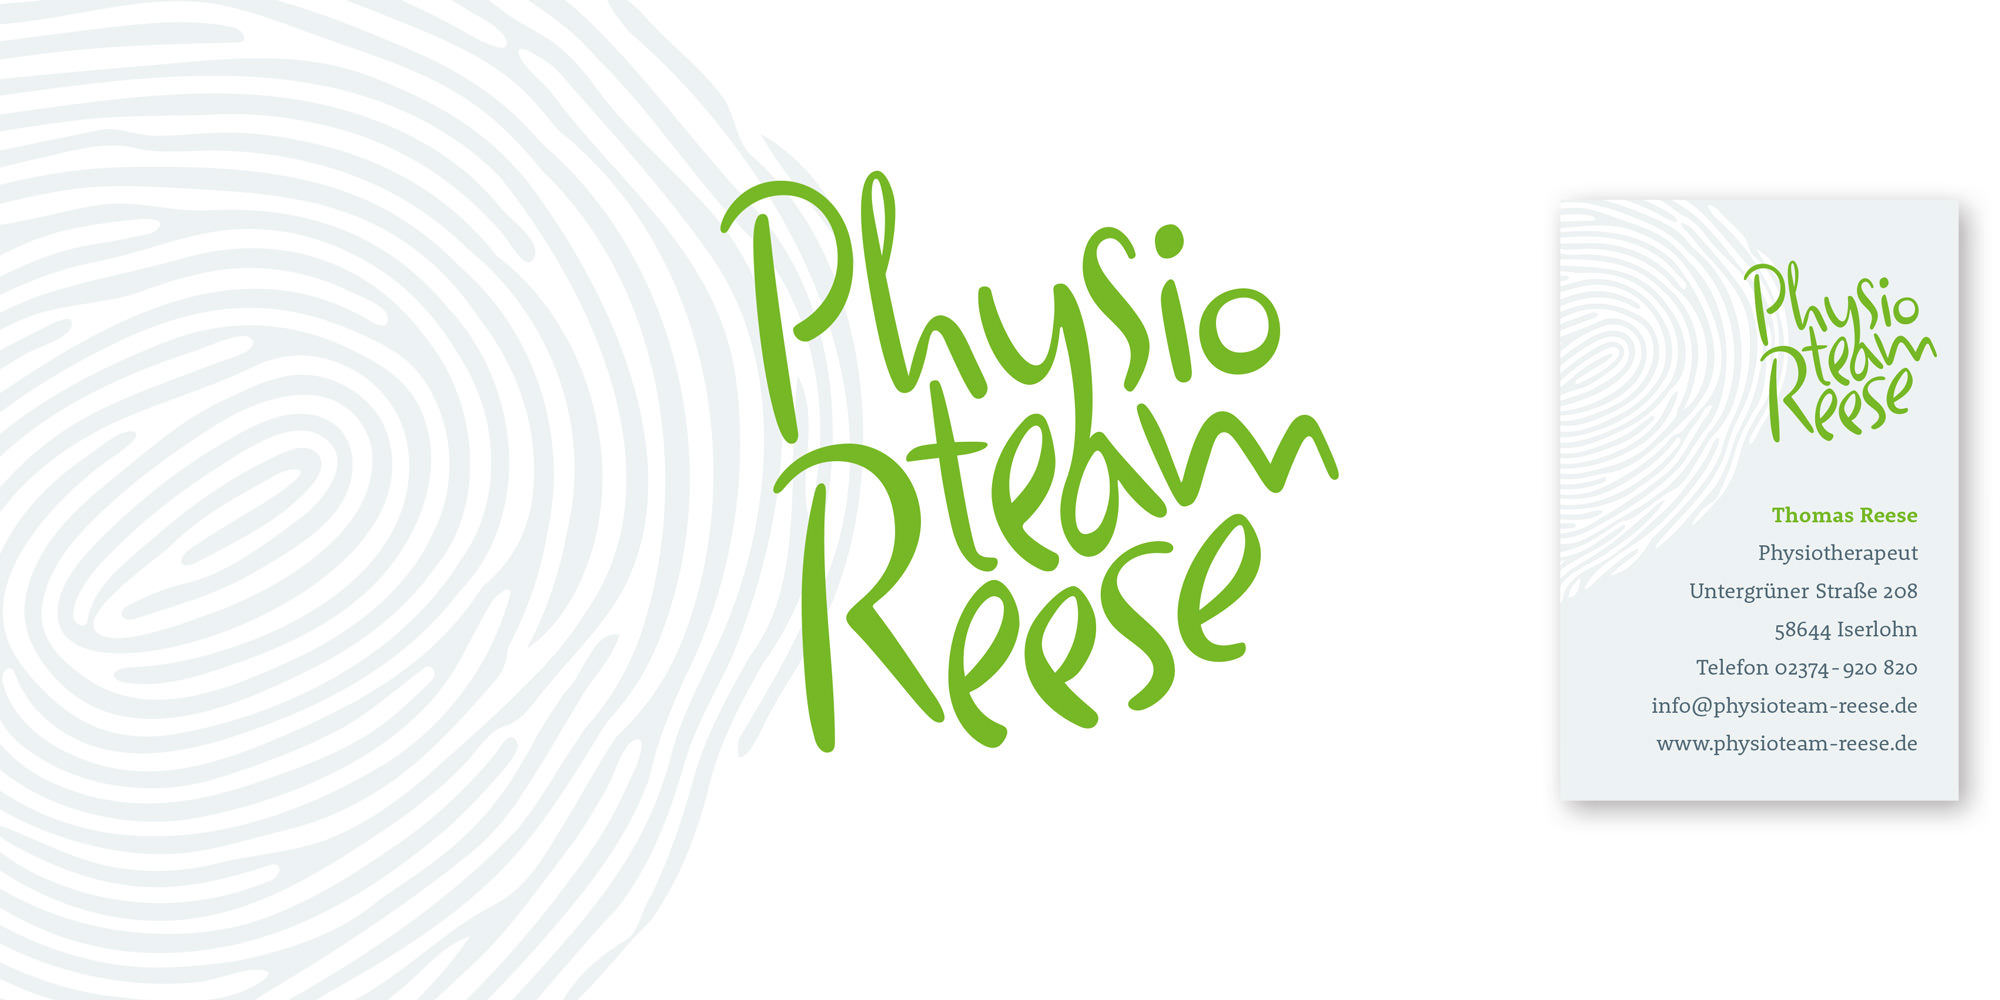 Physioteam Reese